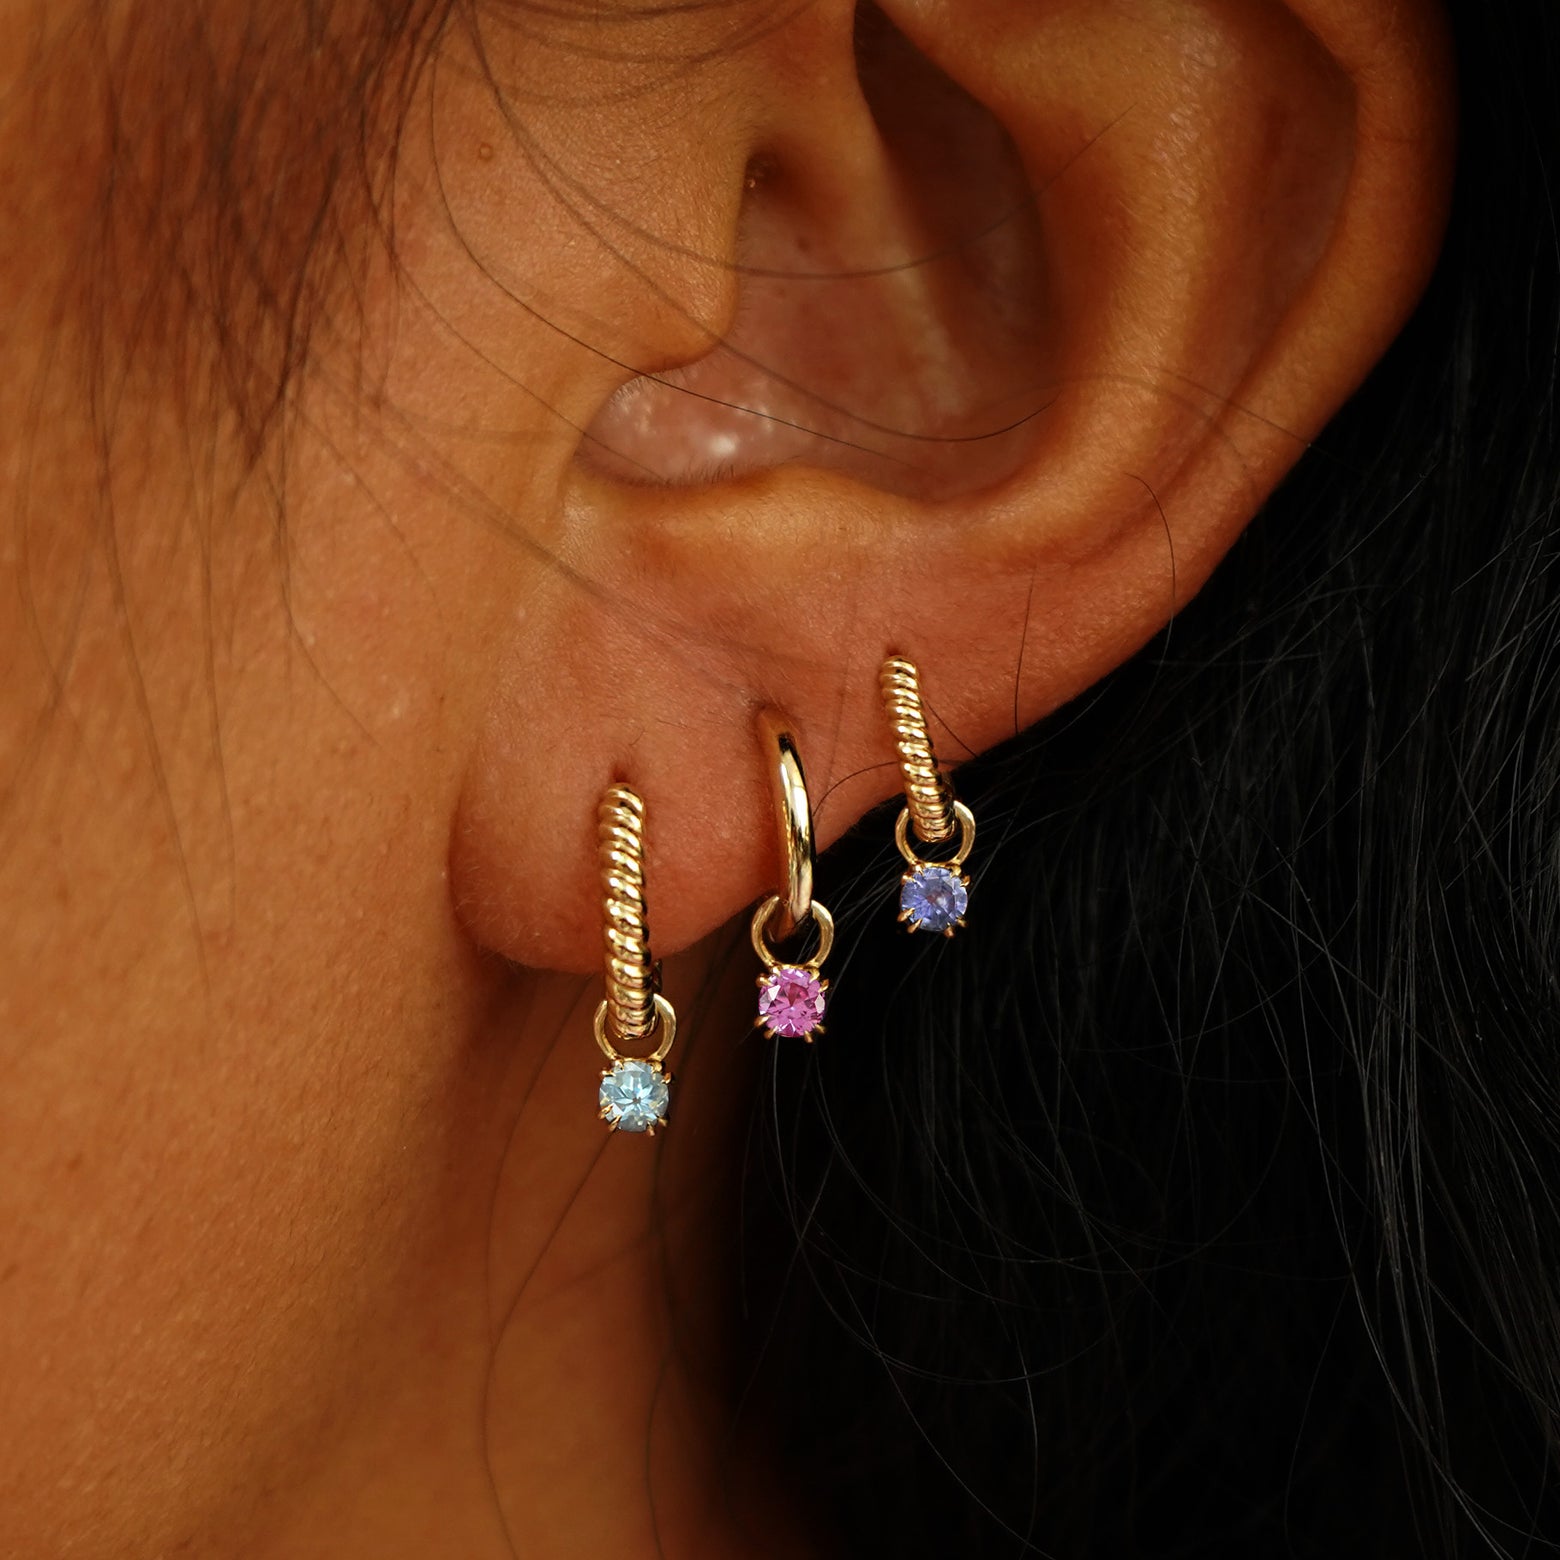 A model's ear wearing Aquamarine, Pink Sapphire, and Tanzanite charms on three different Huggie Hoop Earrings